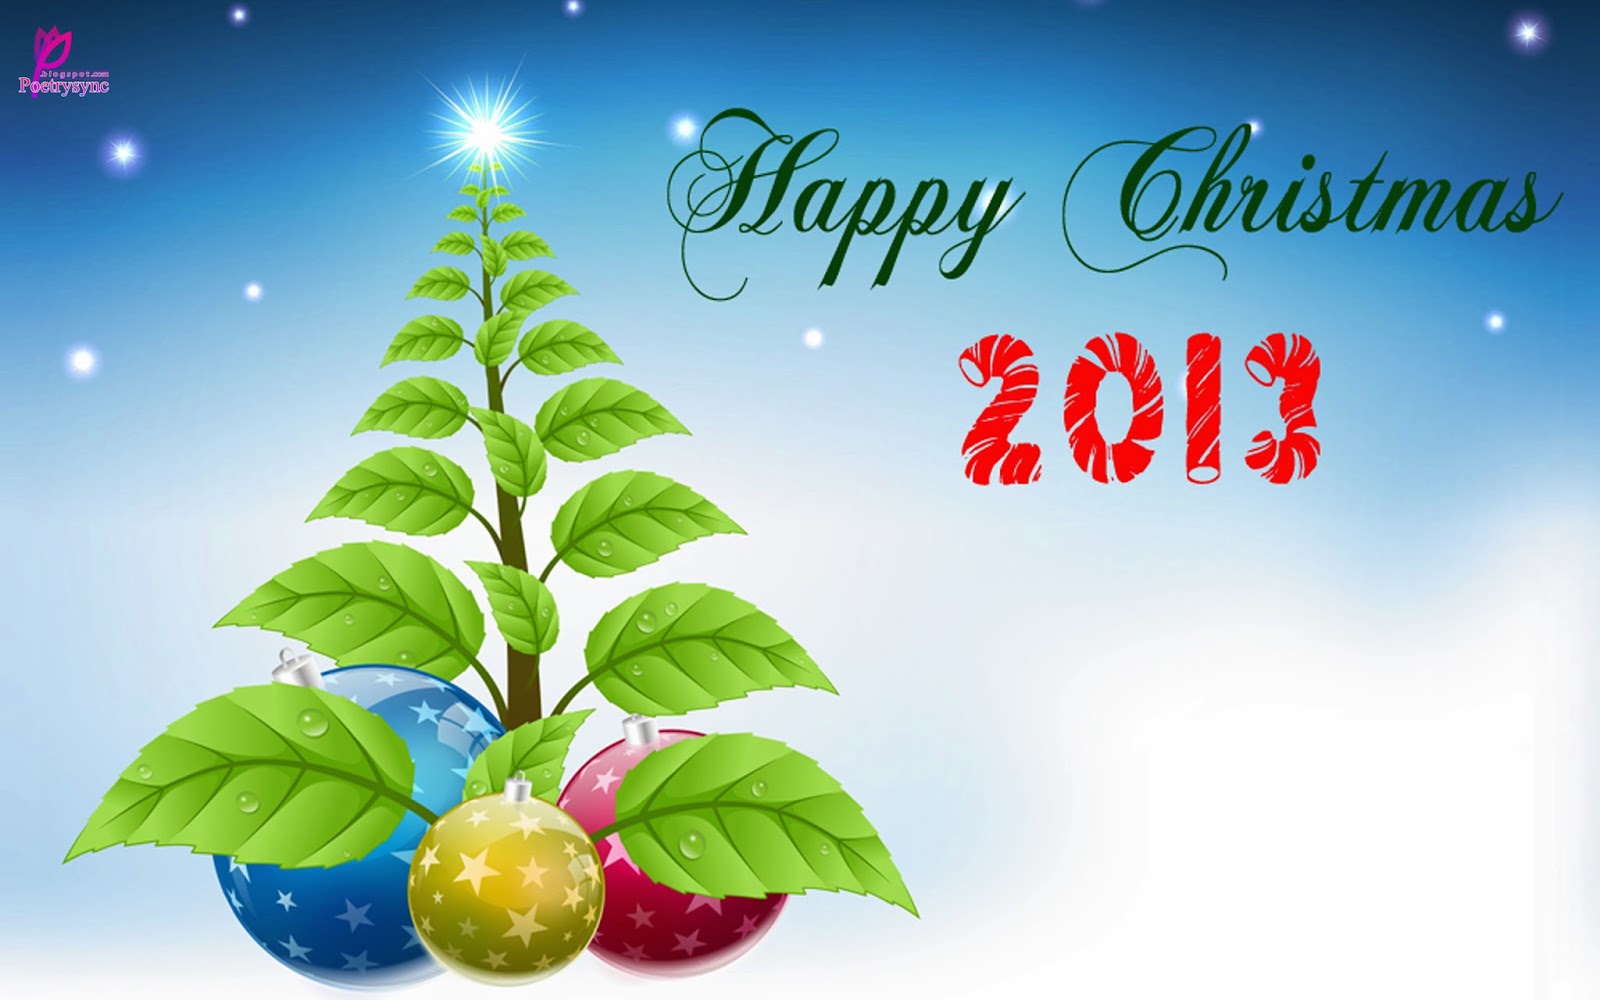 Merry Christmas and Happy New Year Greetings for Facebook